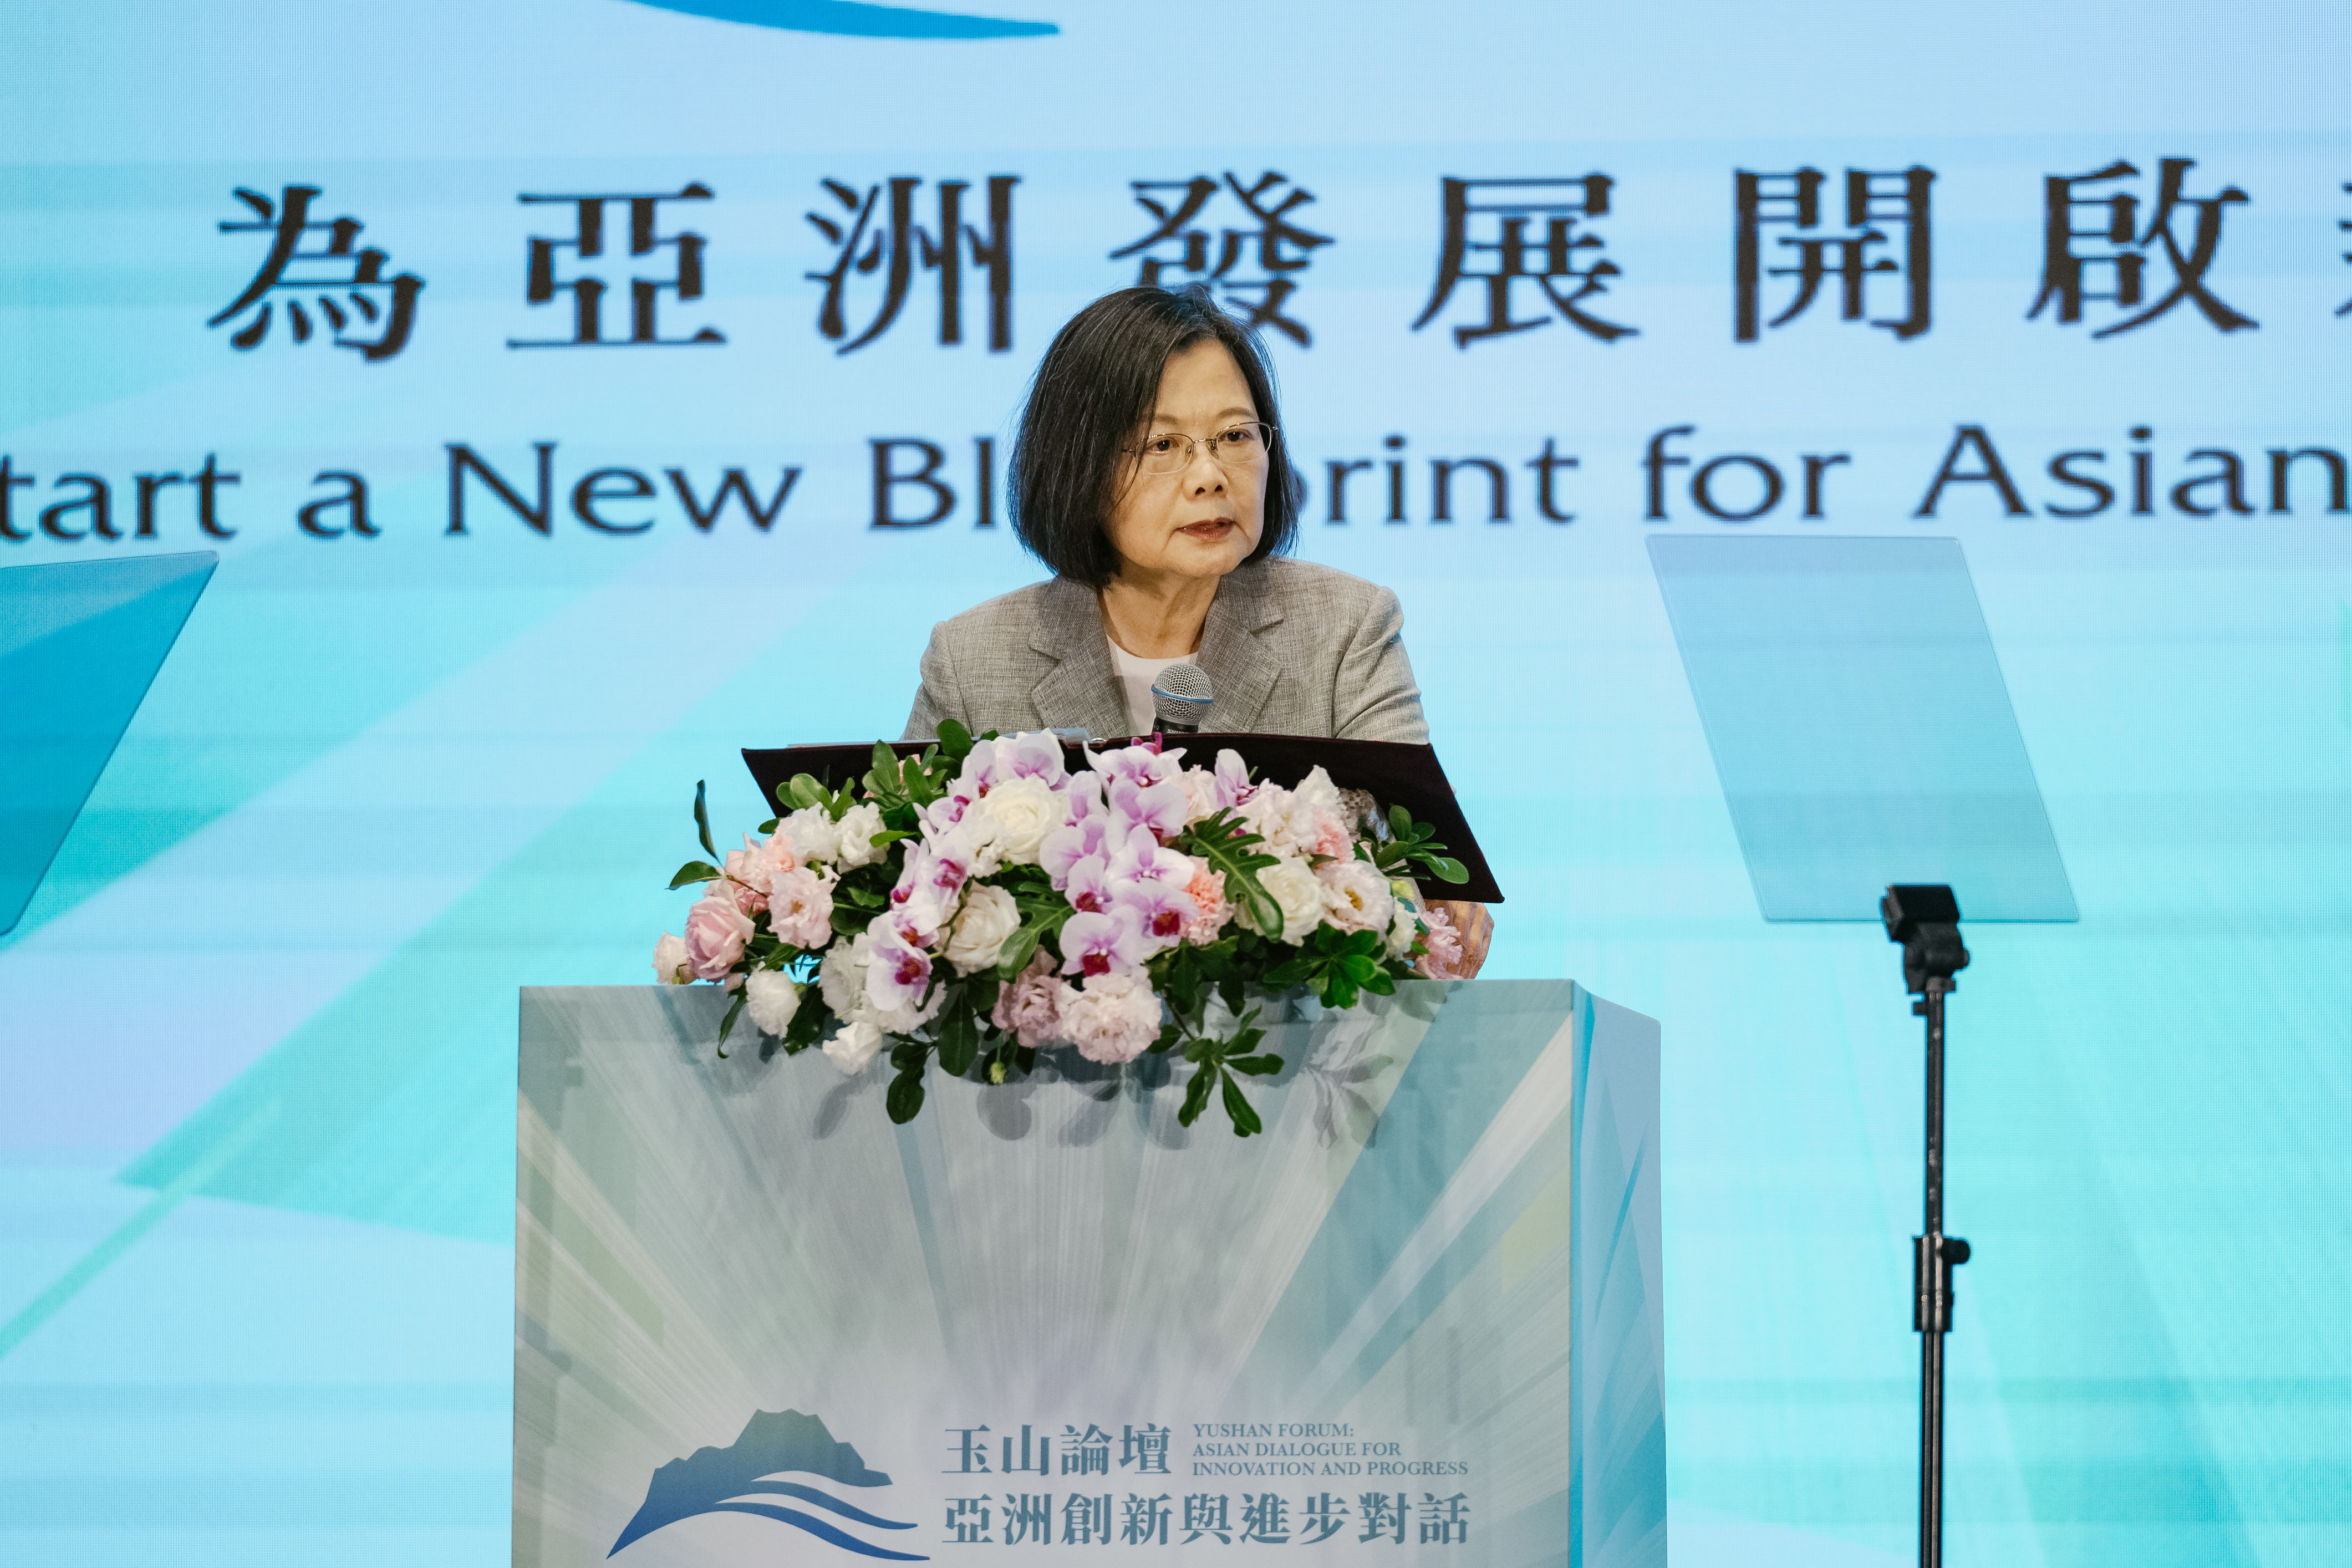 2023 Yushan Forum: Asian Dialogue for Innovation and Progress “Start a New Blueprint for Asian Development” President Tsai: Taiwan is part of the solution